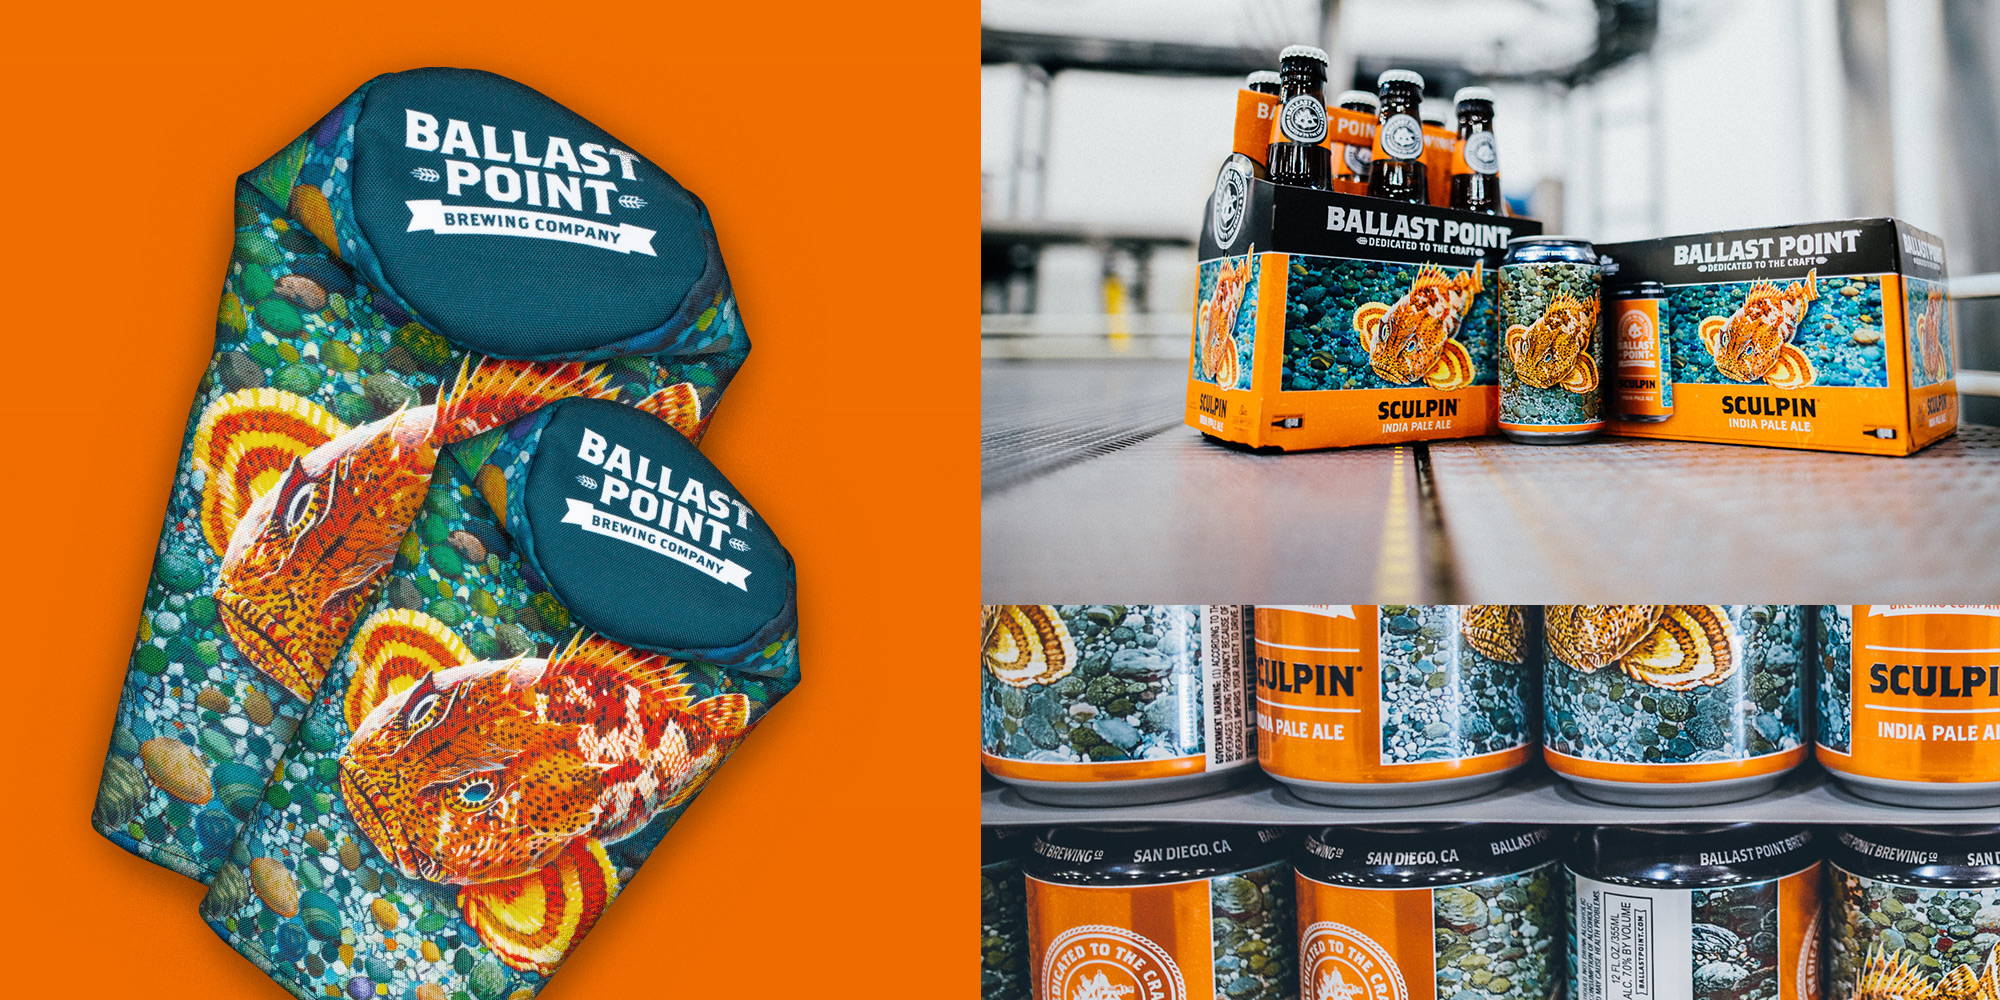 Custom Branded Merchandise Golf Headcover for Ballas Point's Sculpin India Pale Ale